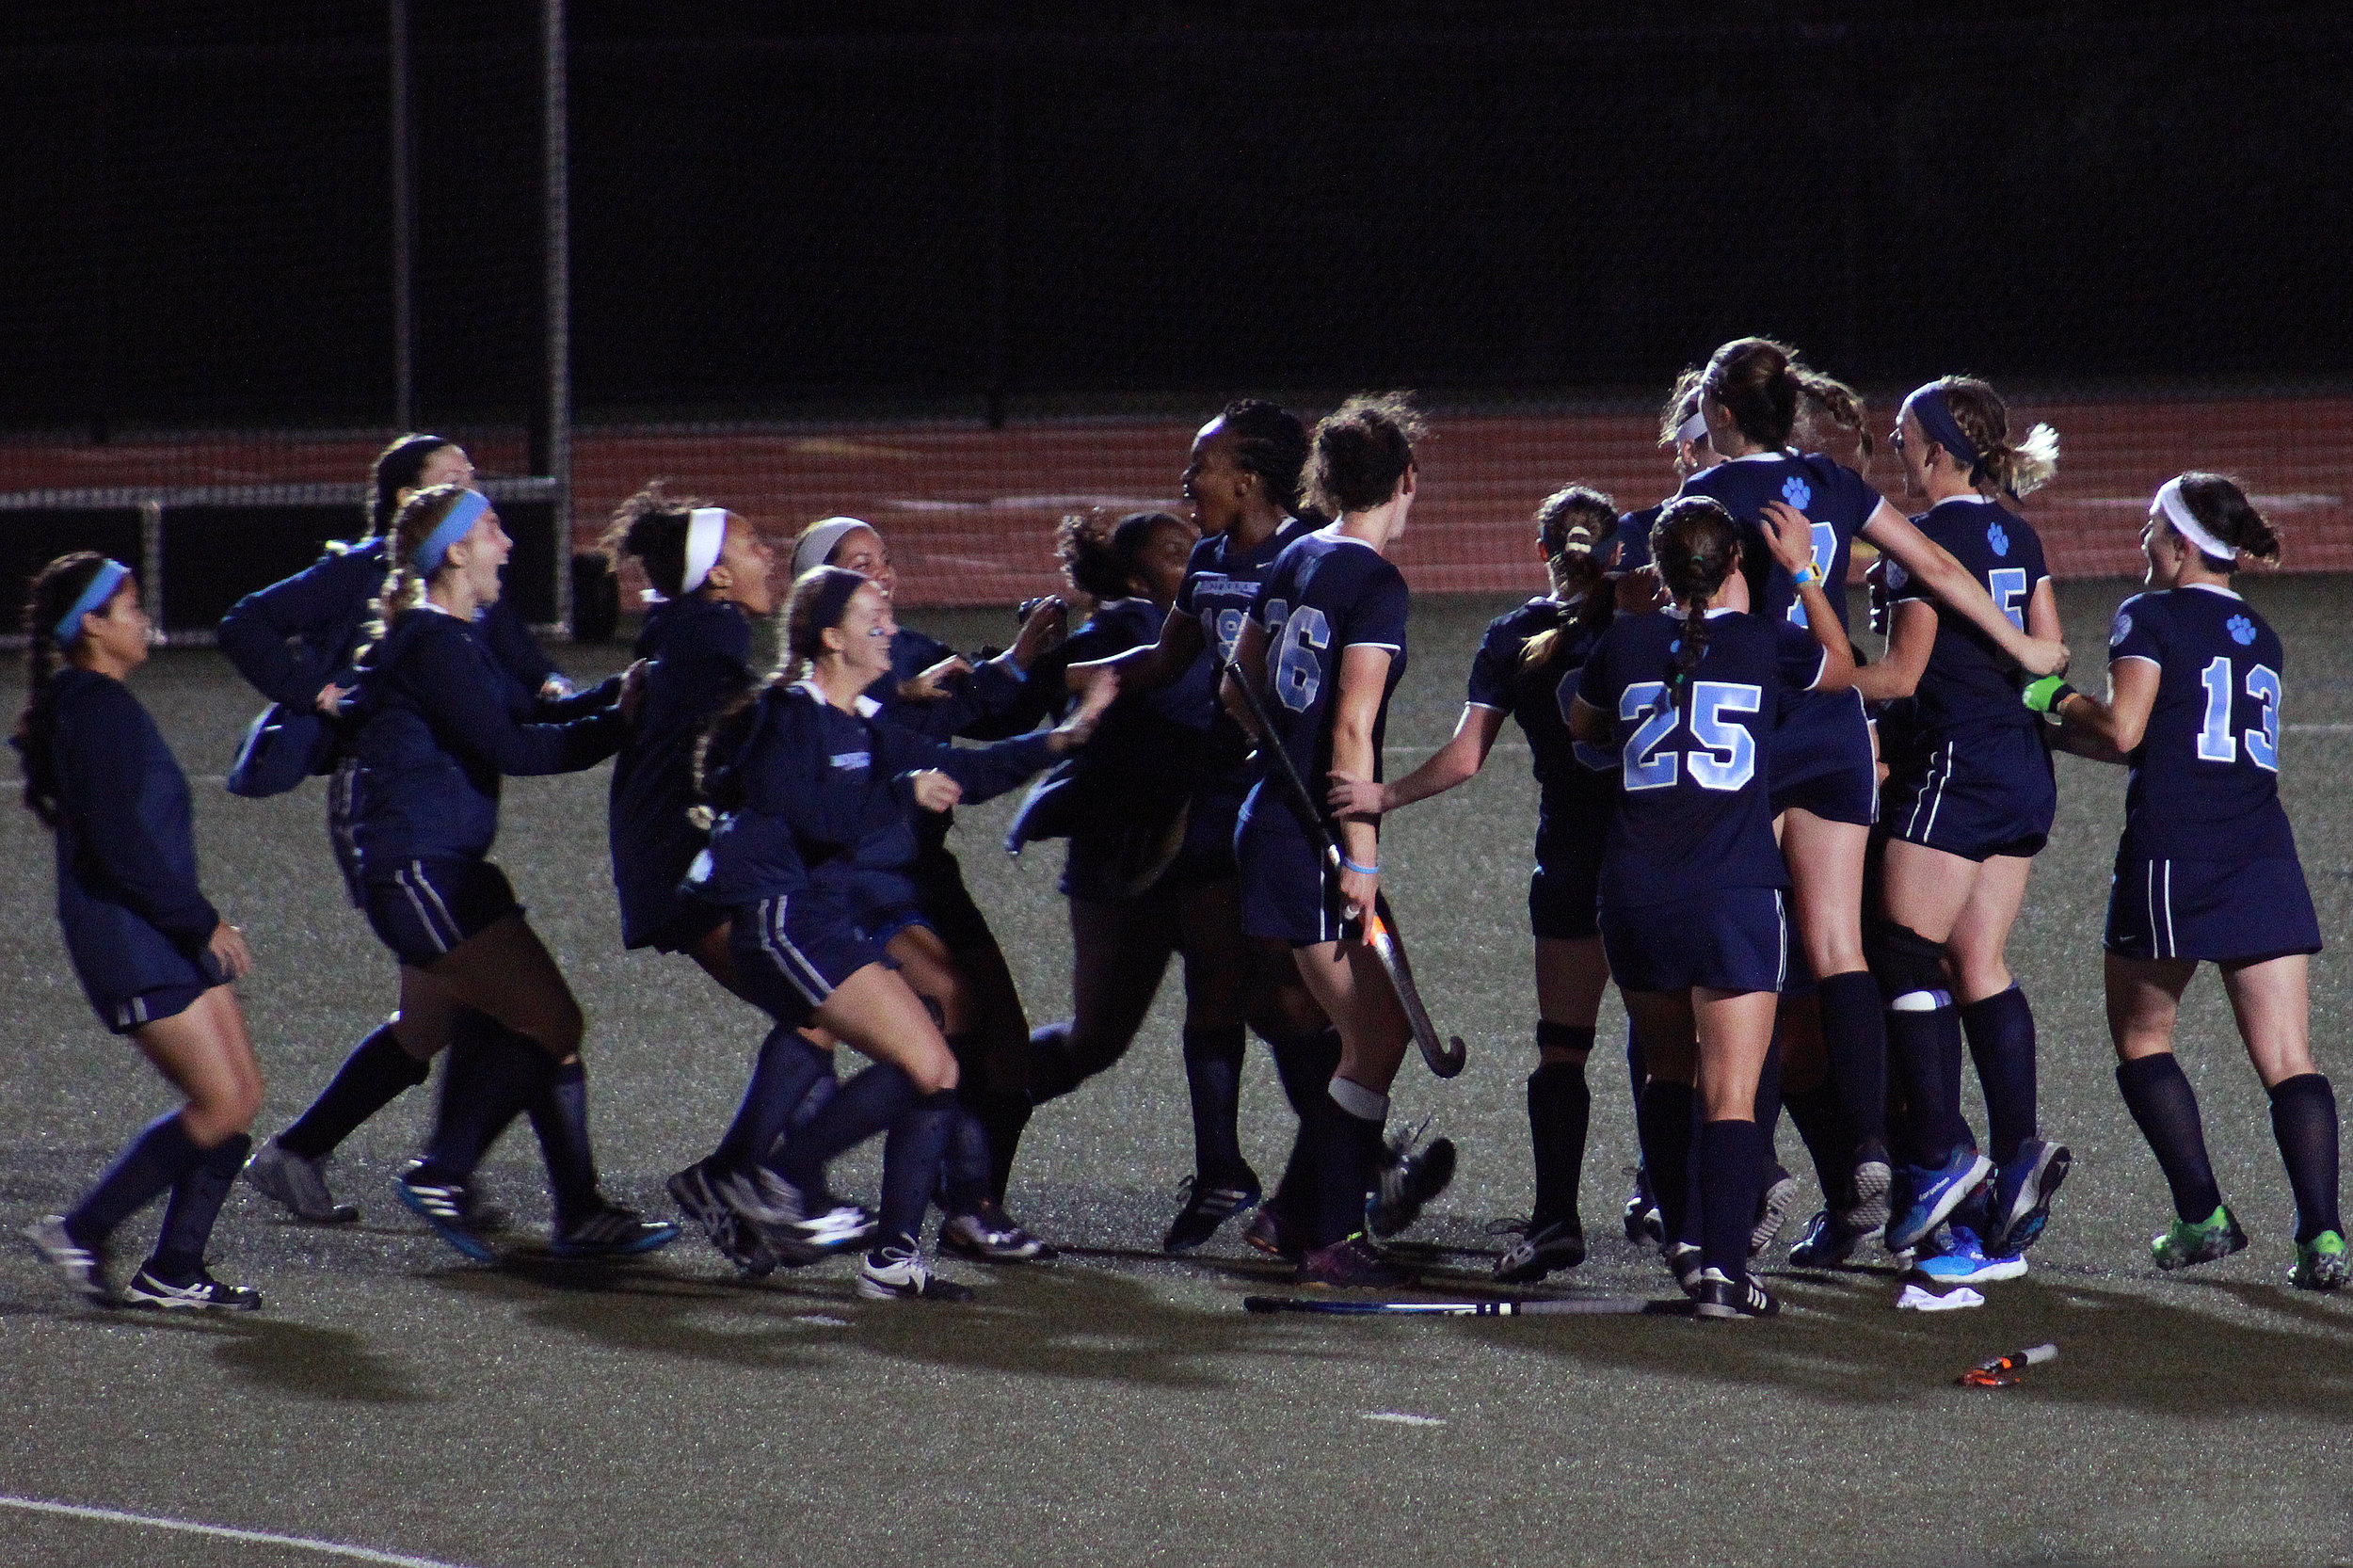  Photo by Megan MacQuarrie ’19 MHC Field Hockey celebrated victory over Smith College on Tuesday night, just seconds after Colby Newsham ’19 scored the winning goal. Victory in this game brought the Lyons to a season record of 5–4 overall and 2–1 NEW